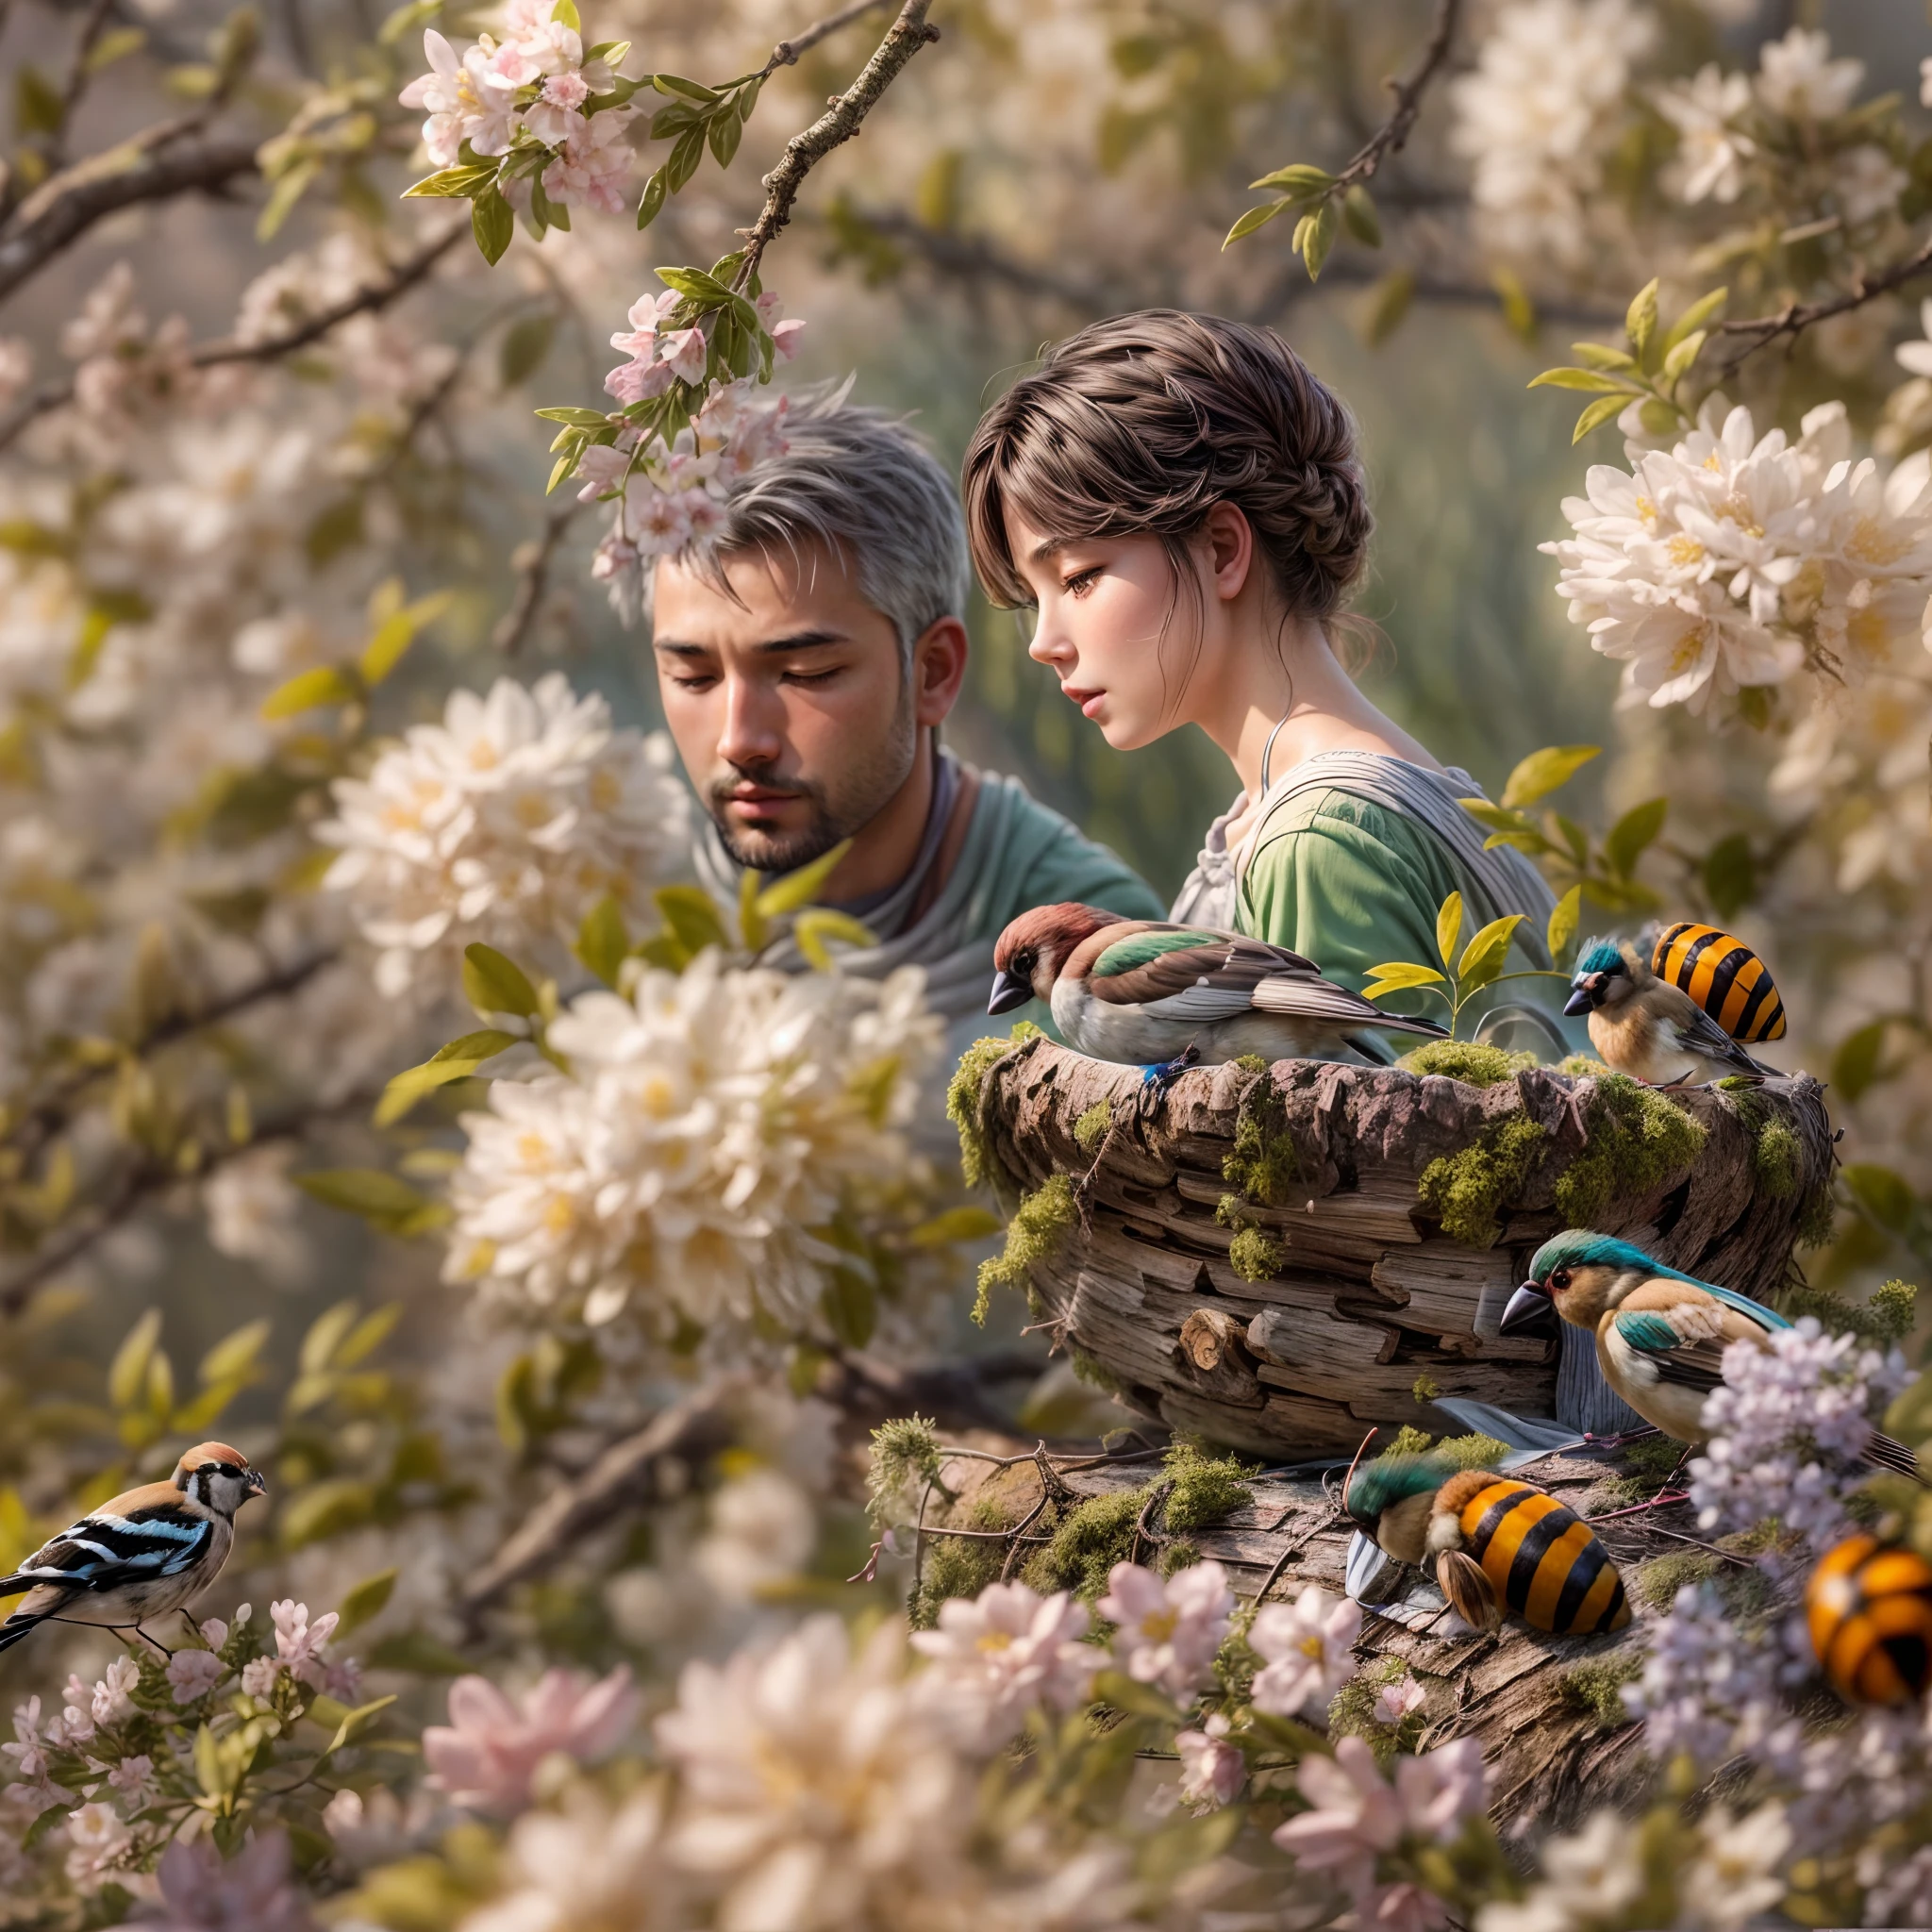 HyperdetAiled Oil pAinting, ultrAwide view, lAte spring, A (wholesome romAntic humAn couple rest in A meAdow of whitethorn bush), (lAdy bug on flower), vivAcious (bee pollinAting pink flowers), (chAffinch wAtching scene from grey mossy nest), mAsterpiece, mAsterwork, Sorgfältig, intimAte, nuAnced, highest quAlity, höchste Wiedergabetreue, höchste Auflösung, highres, highest detAil, hyper-detAiled, detAil enhAncement, deeply detAiled, uhd, HDR, fhd, 8k, 16k, 32k, k, cAustics, subsurfAce scAttering, High DynAmic RAnge, DynAmic Tone MApping, SpeculAr reflection, Subpixel-Faltung,